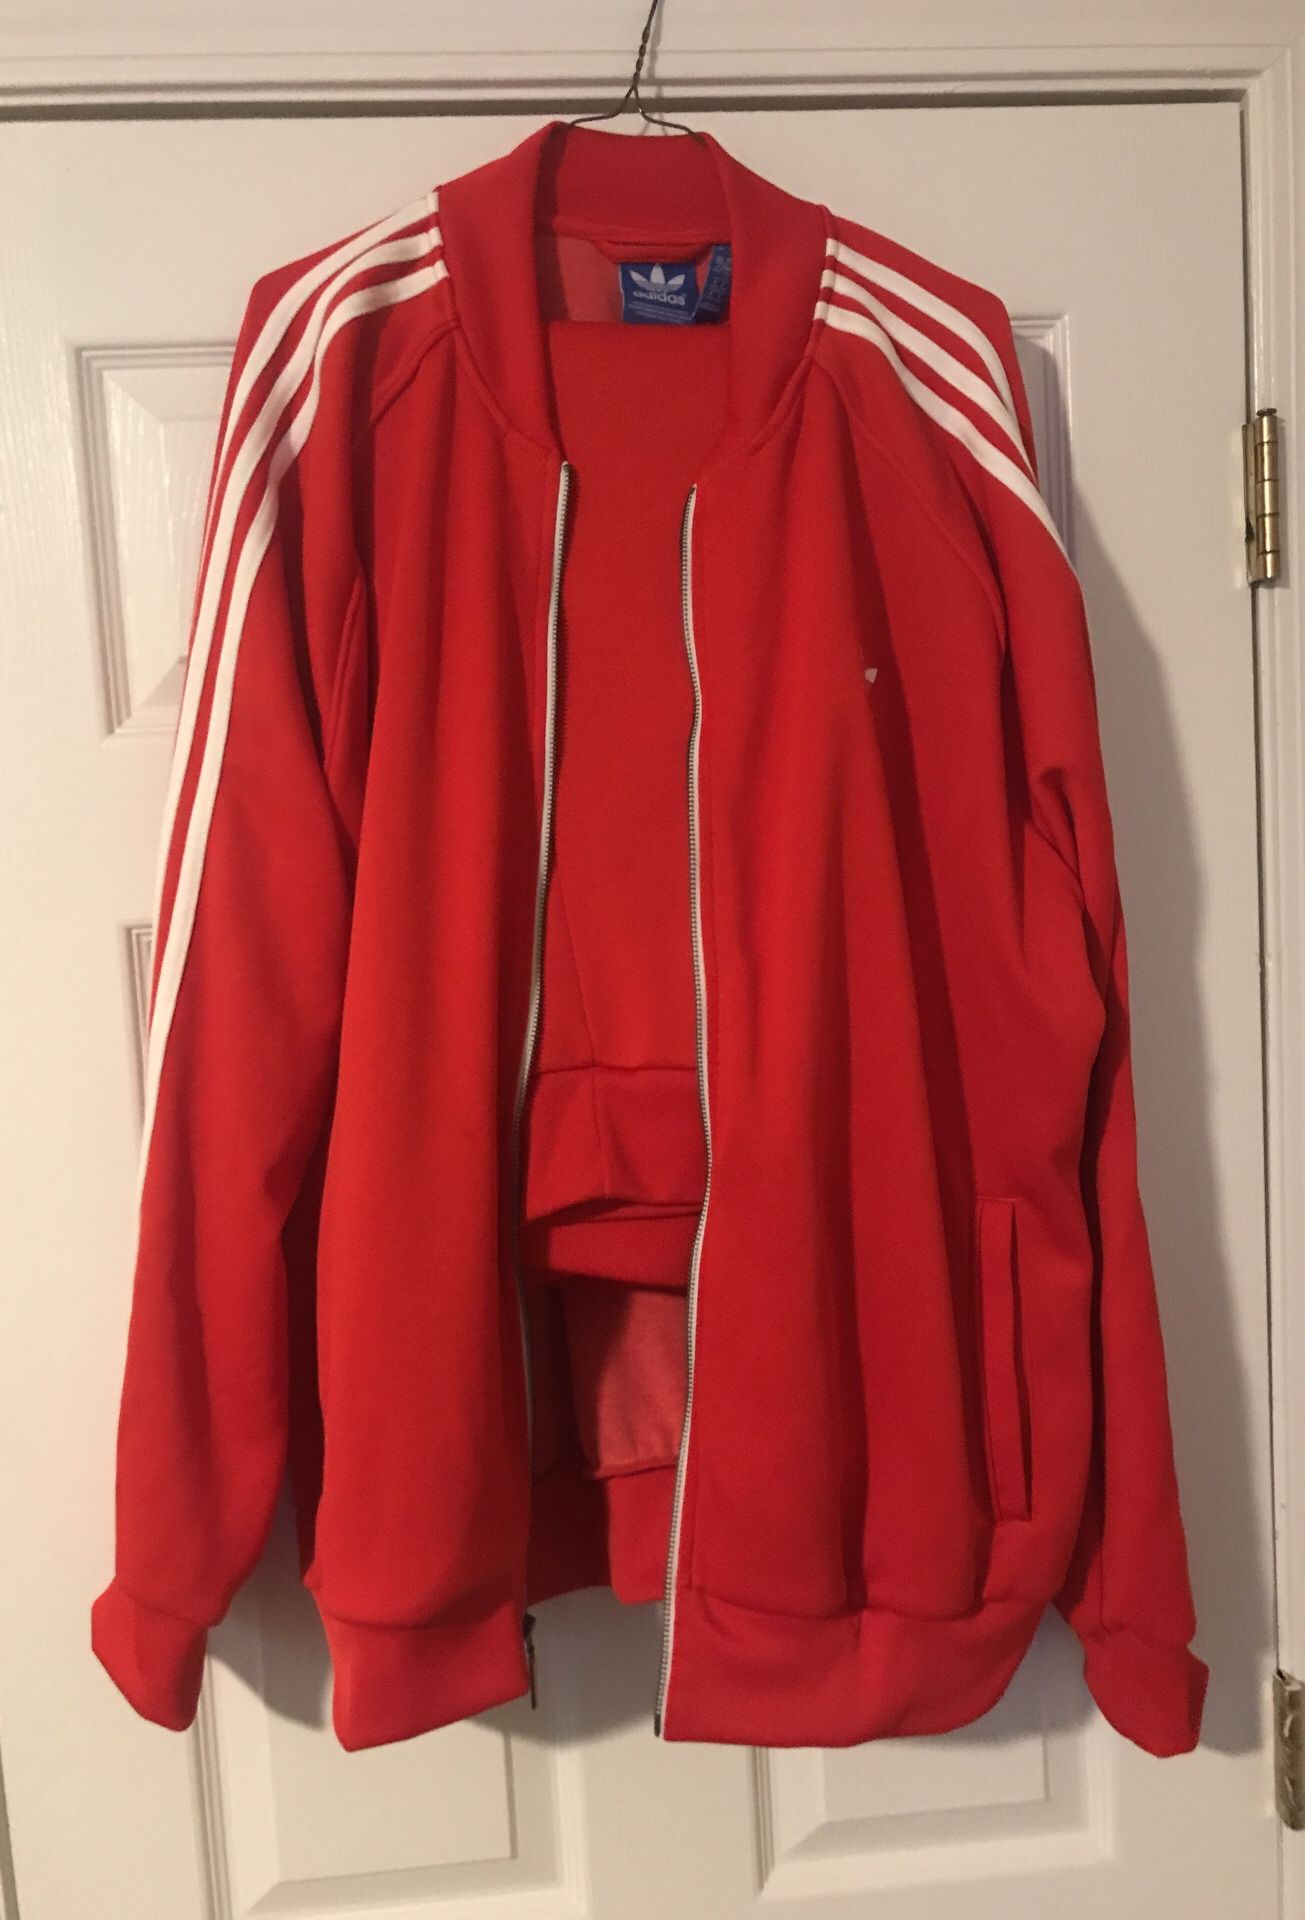 Adidas XXL sweatsuit red and white